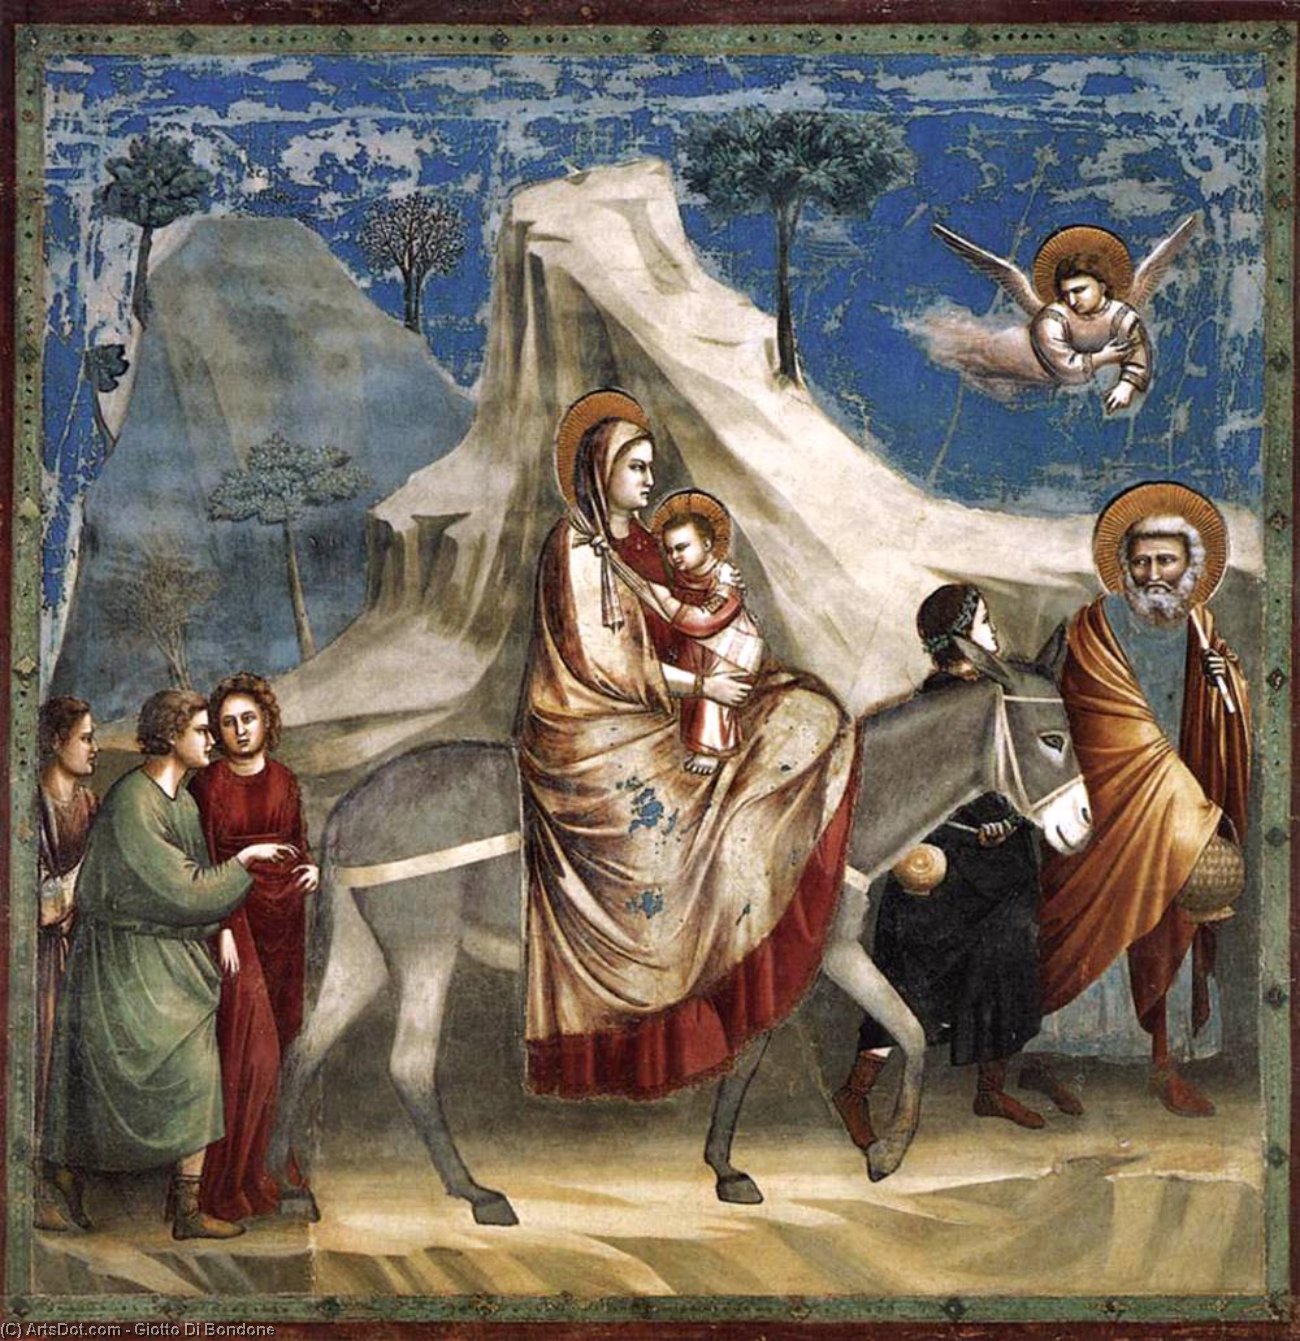 WikiOO.org - Encyclopedia of Fine Arts - Lukisan, Artwork Giotto Di Bondone - No. 20 Scenes from the Life of Christ: 4. Flight into Egypt